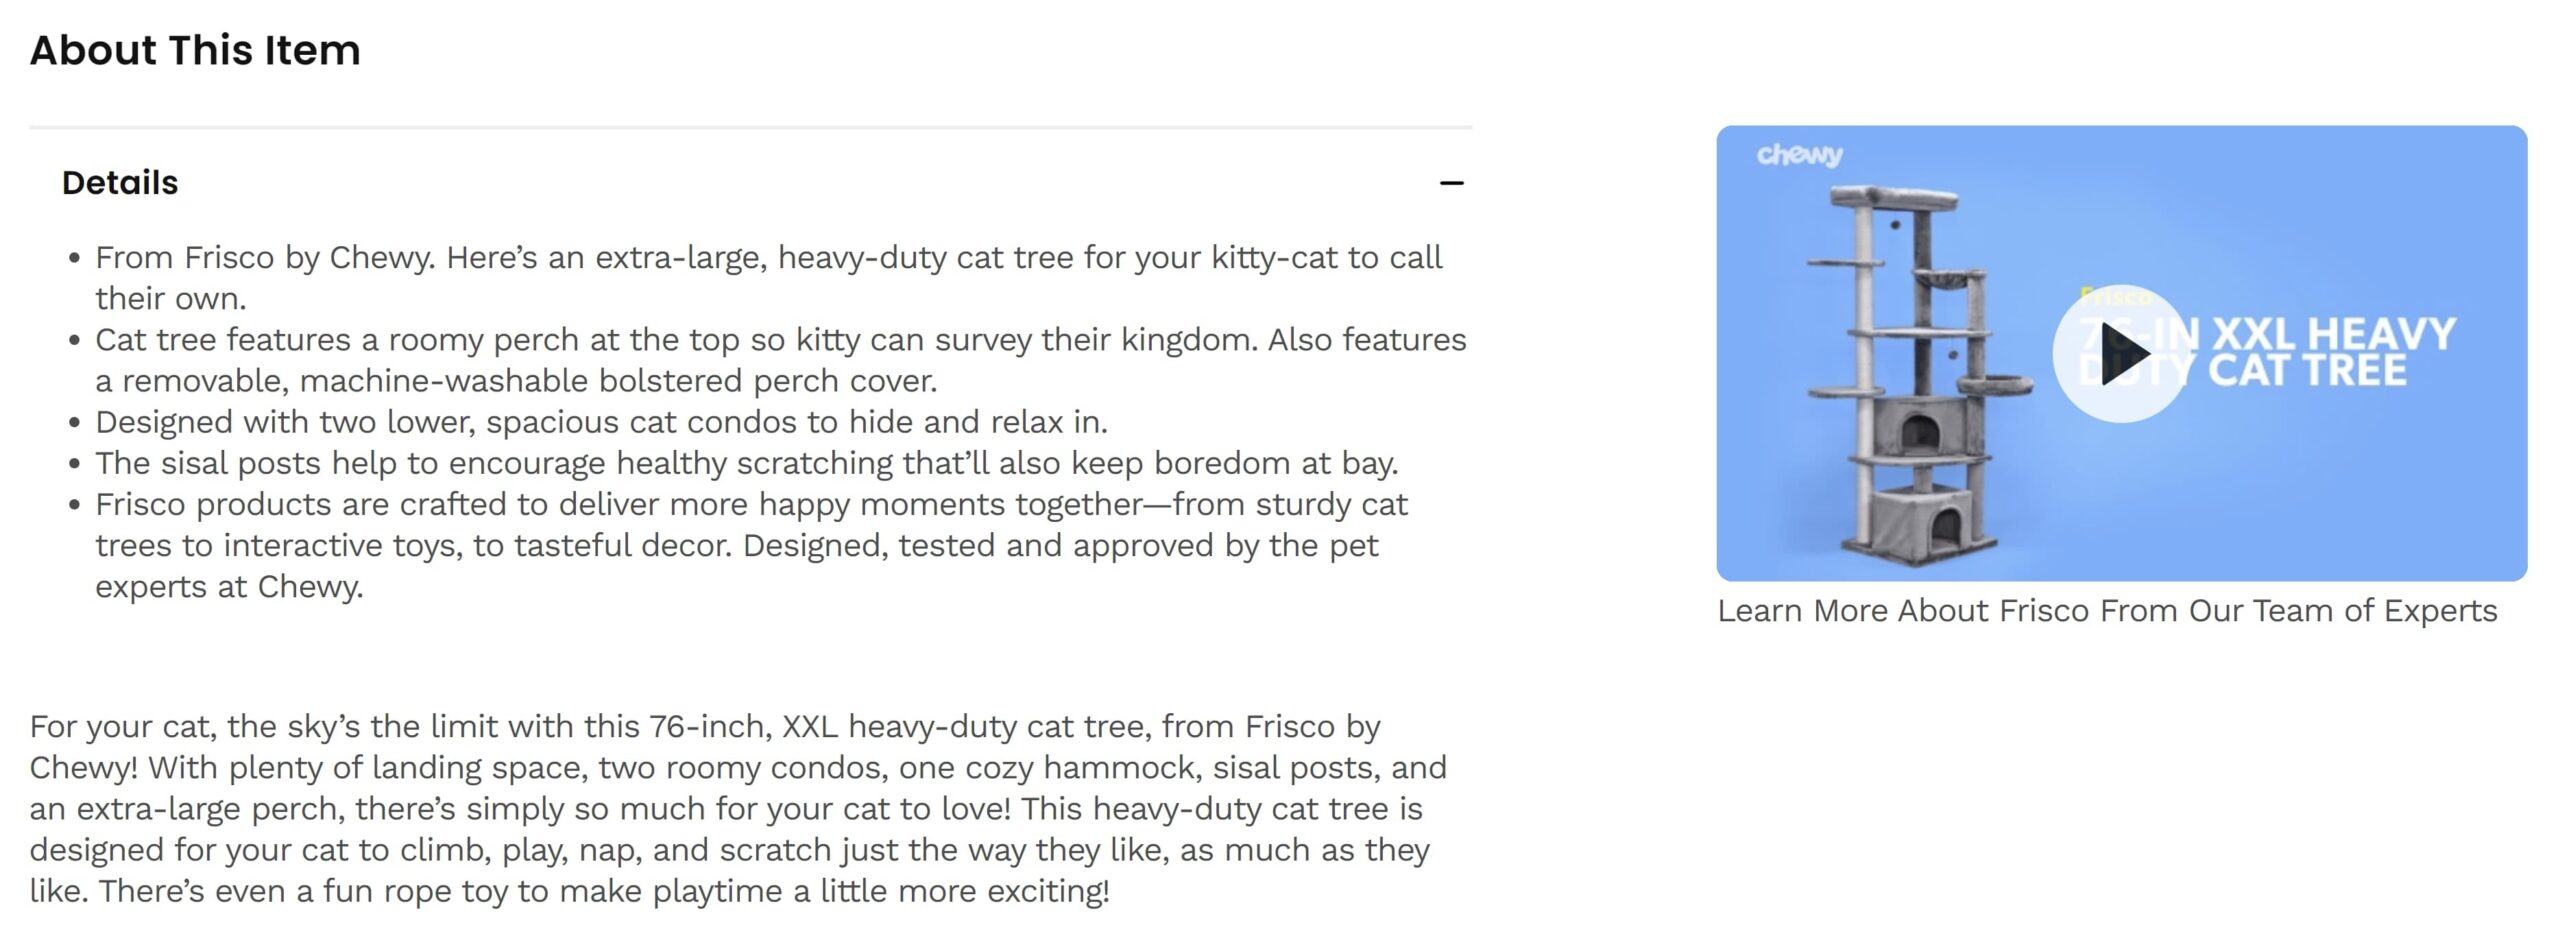 Screenshot of the product attributes of a cat tree.